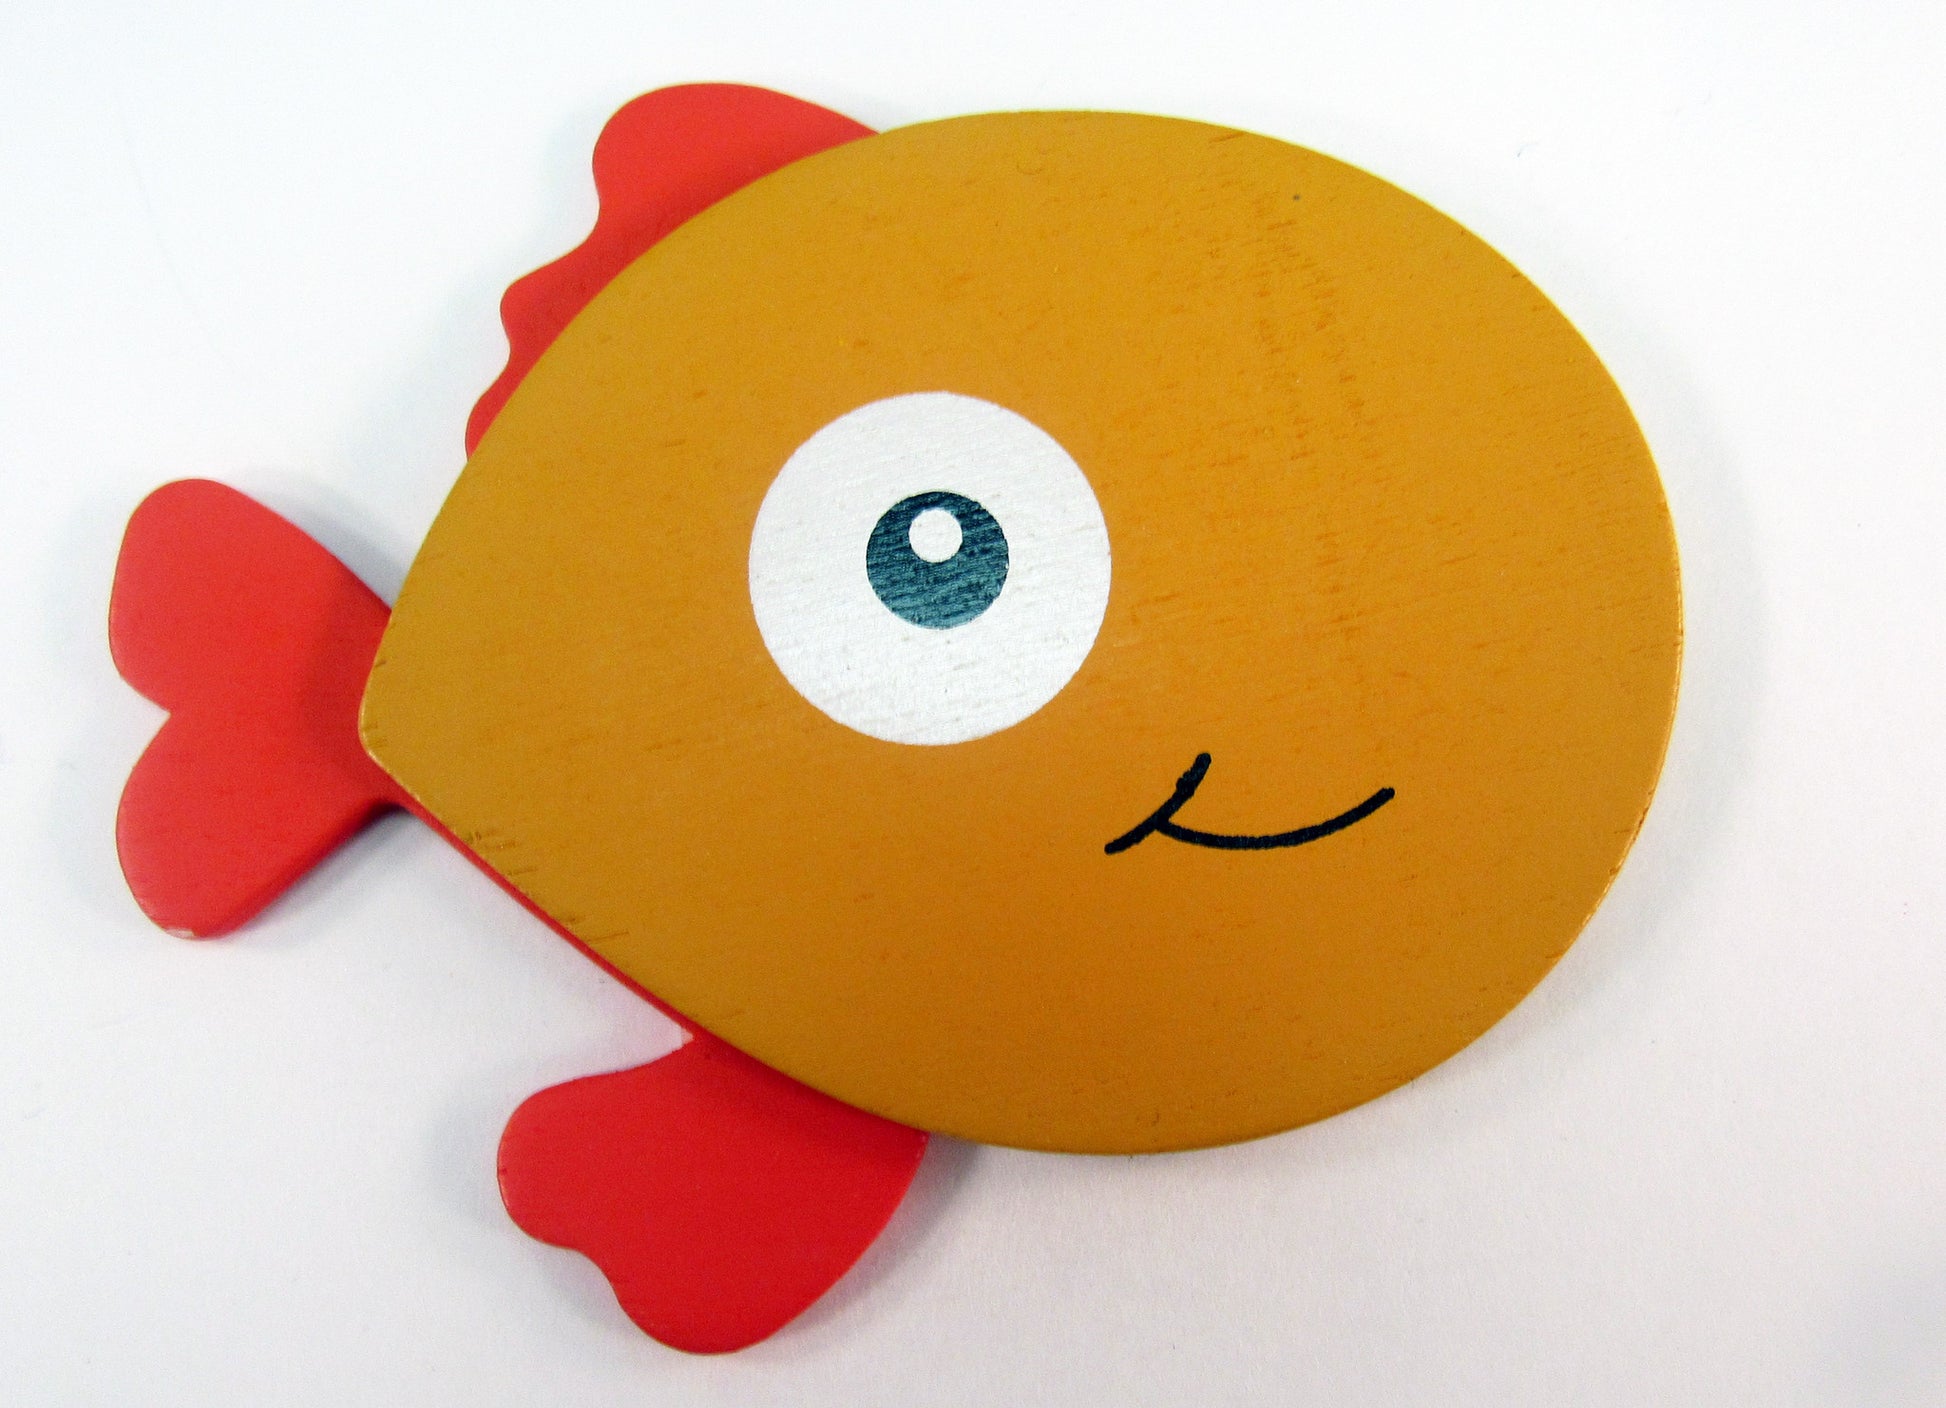 Where is Otto?: Game inspired by A Fish Out of Water by Helen Palmer